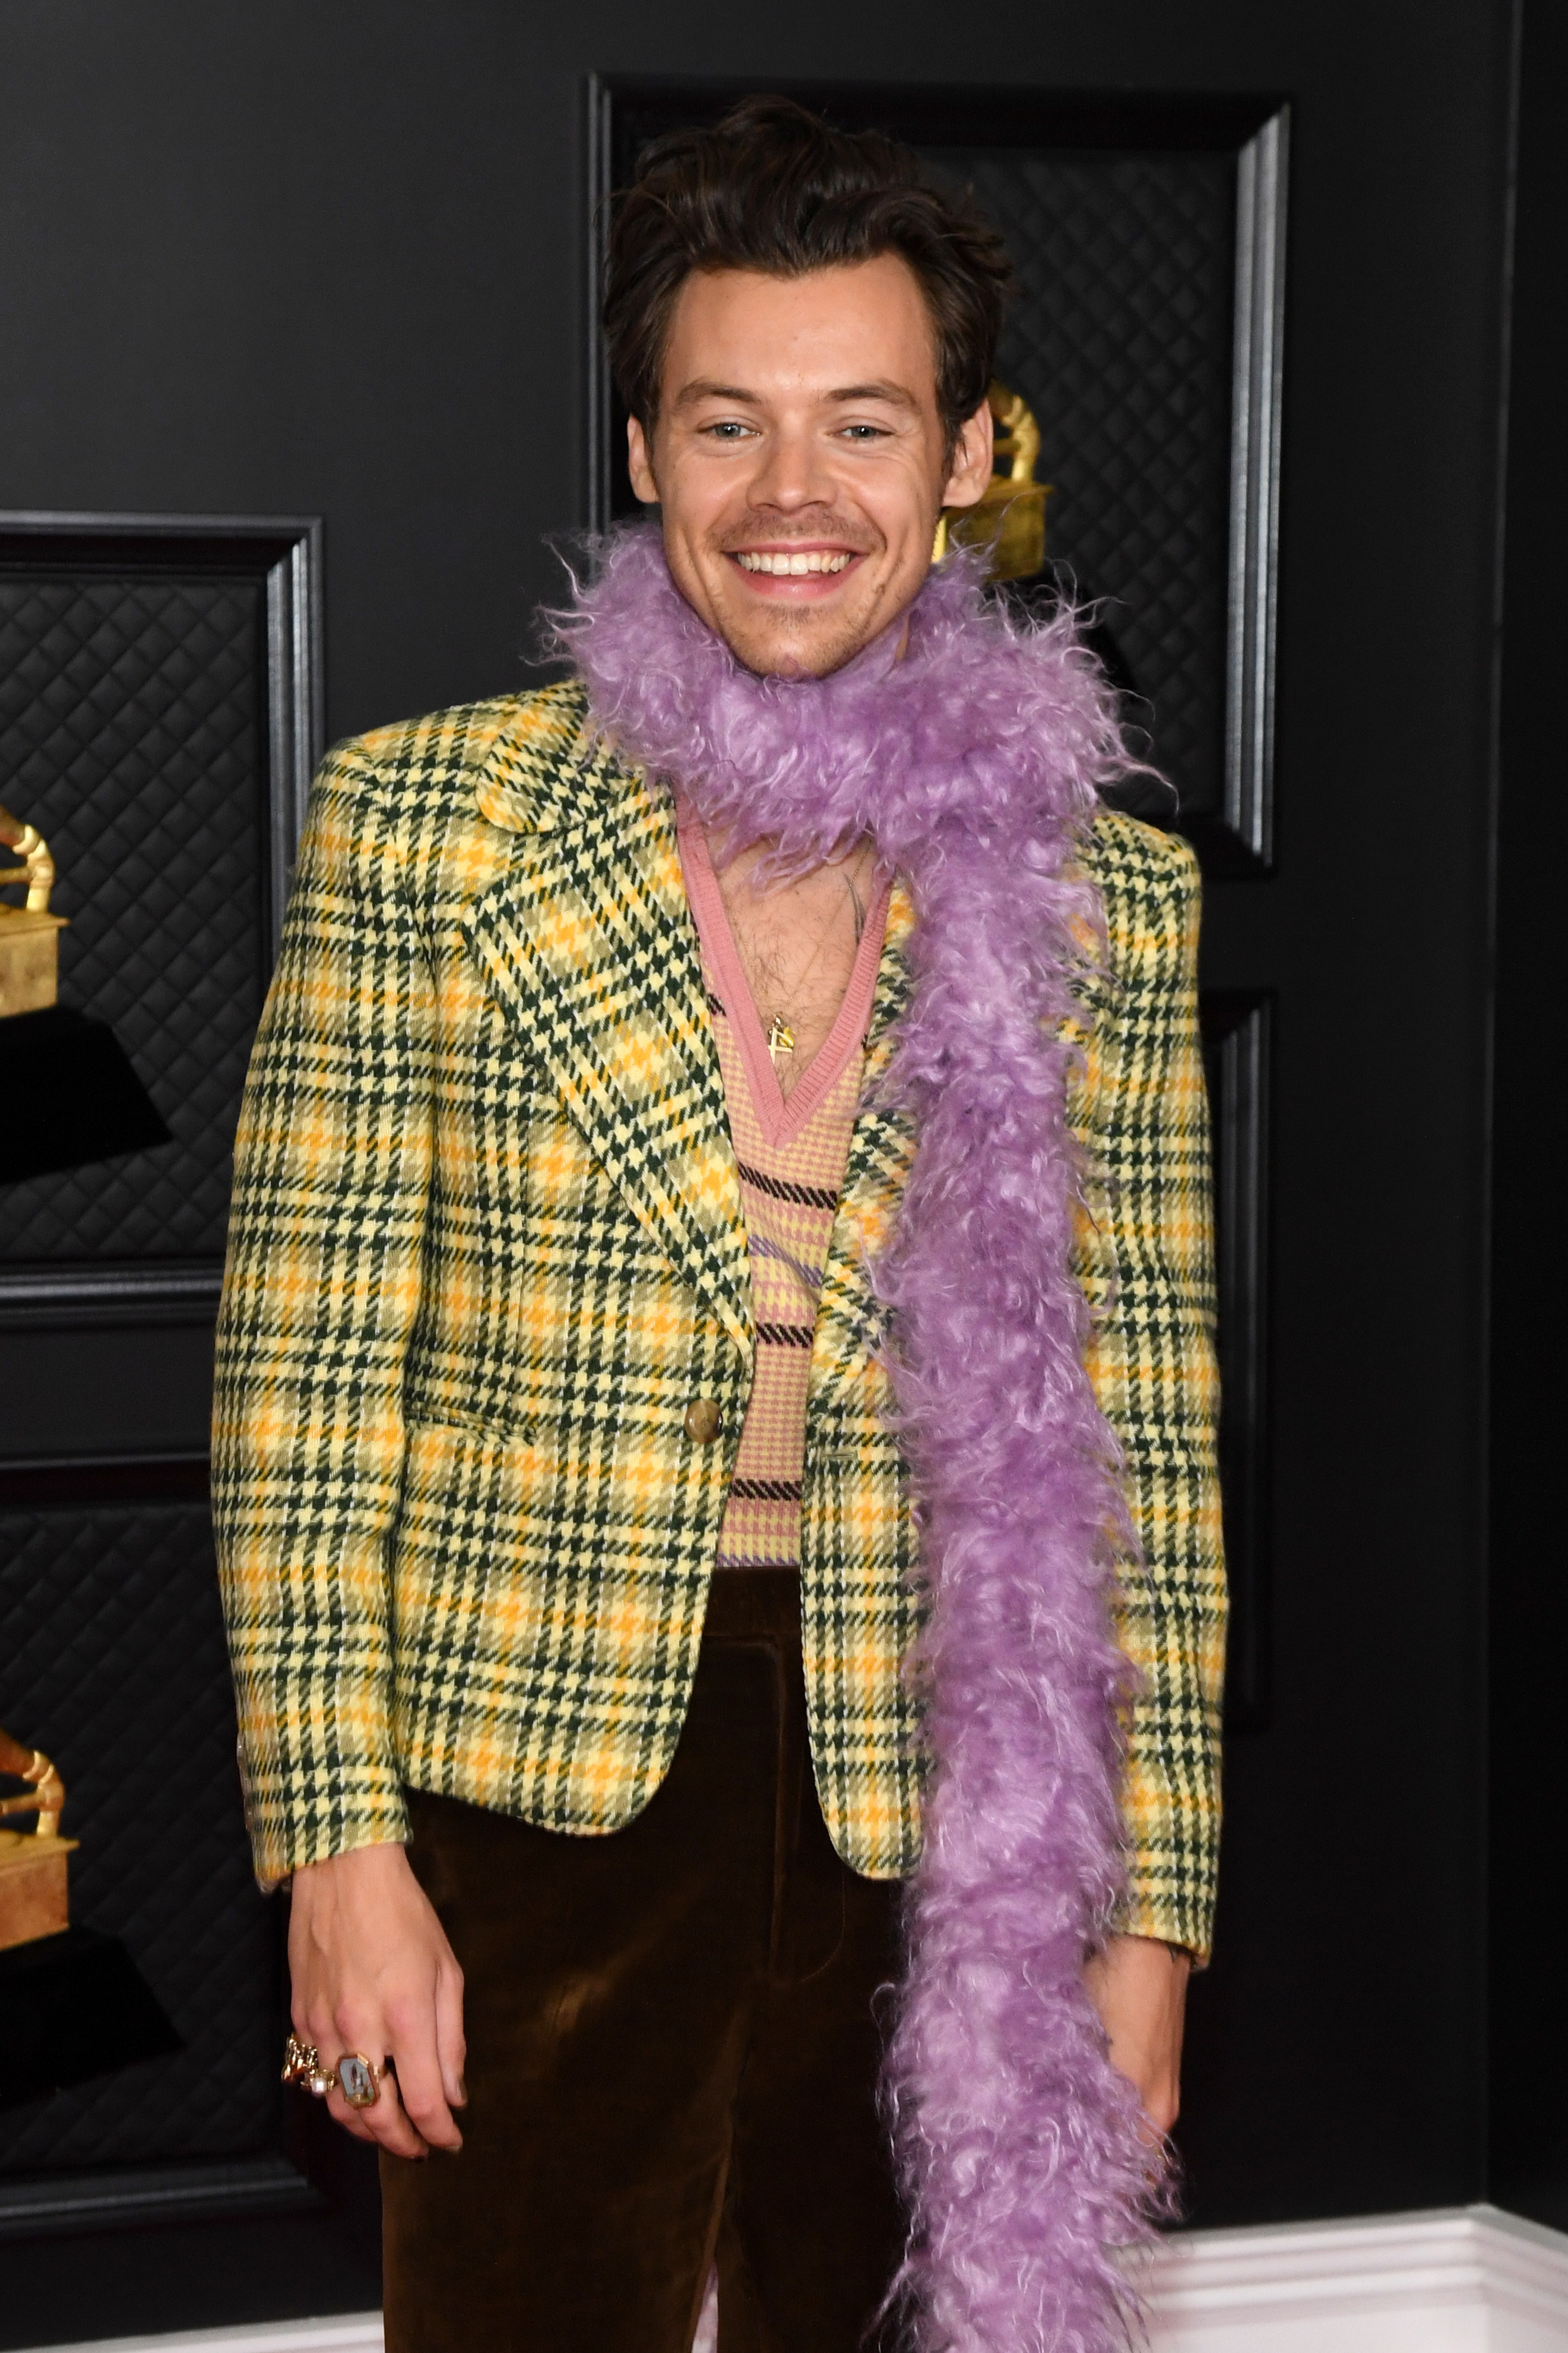 Harry wears a yellow plaid jacket over a knitted V-neck patterned vest and brown cord trousers; he tops it off with a gold necklace and a lilac feather boa